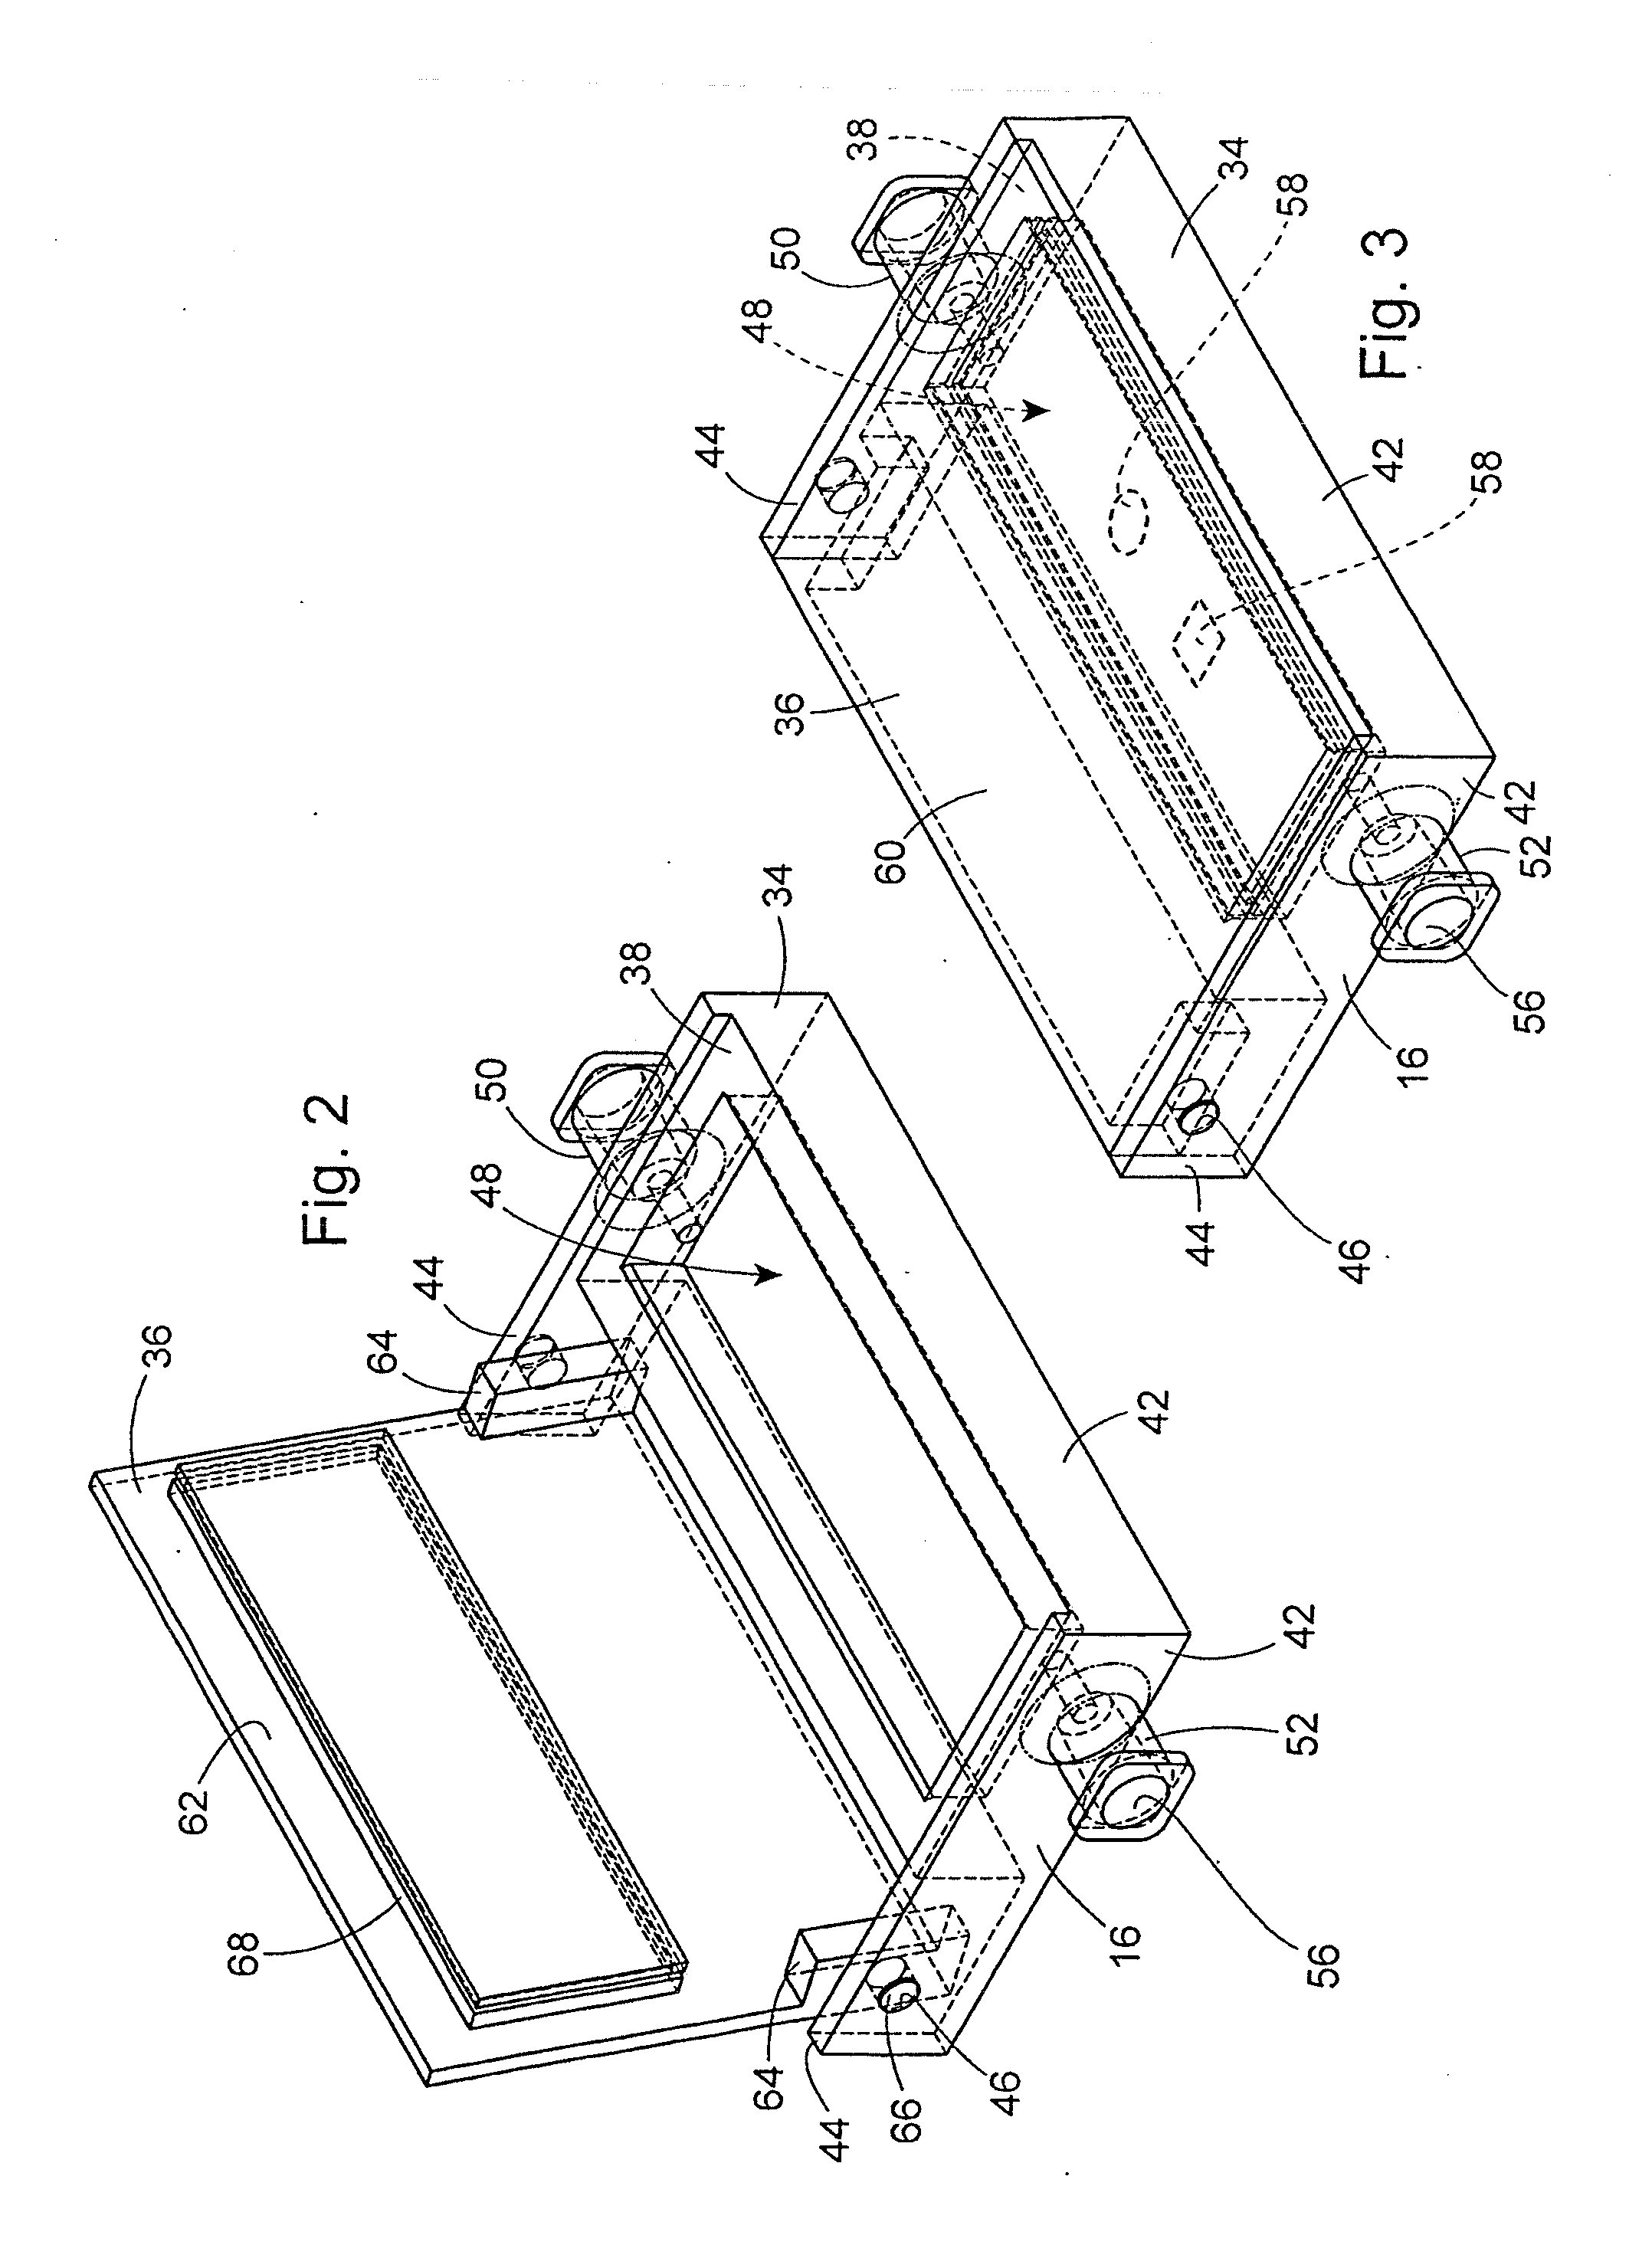 Apparatus and method for reconstituting a pharmaceutical and peparing the reconstituted pharmaceutical for transient application